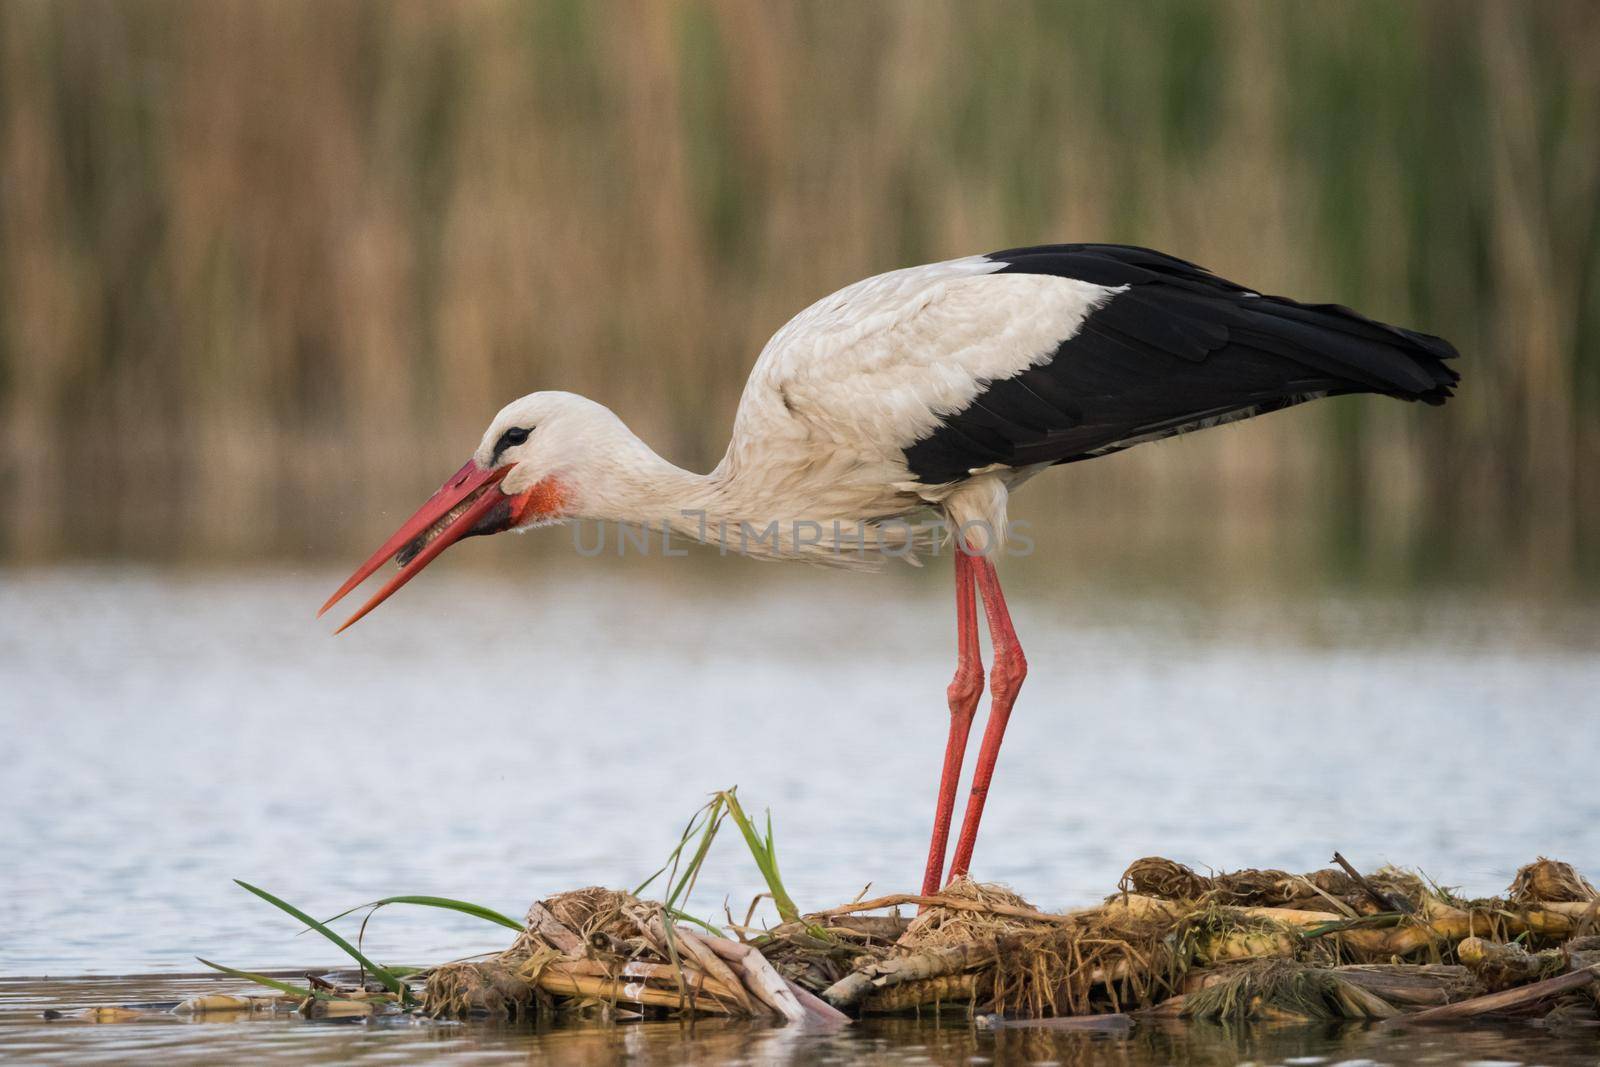 White stork (Ciconia ciconia) eating the fish in hatural habitat.